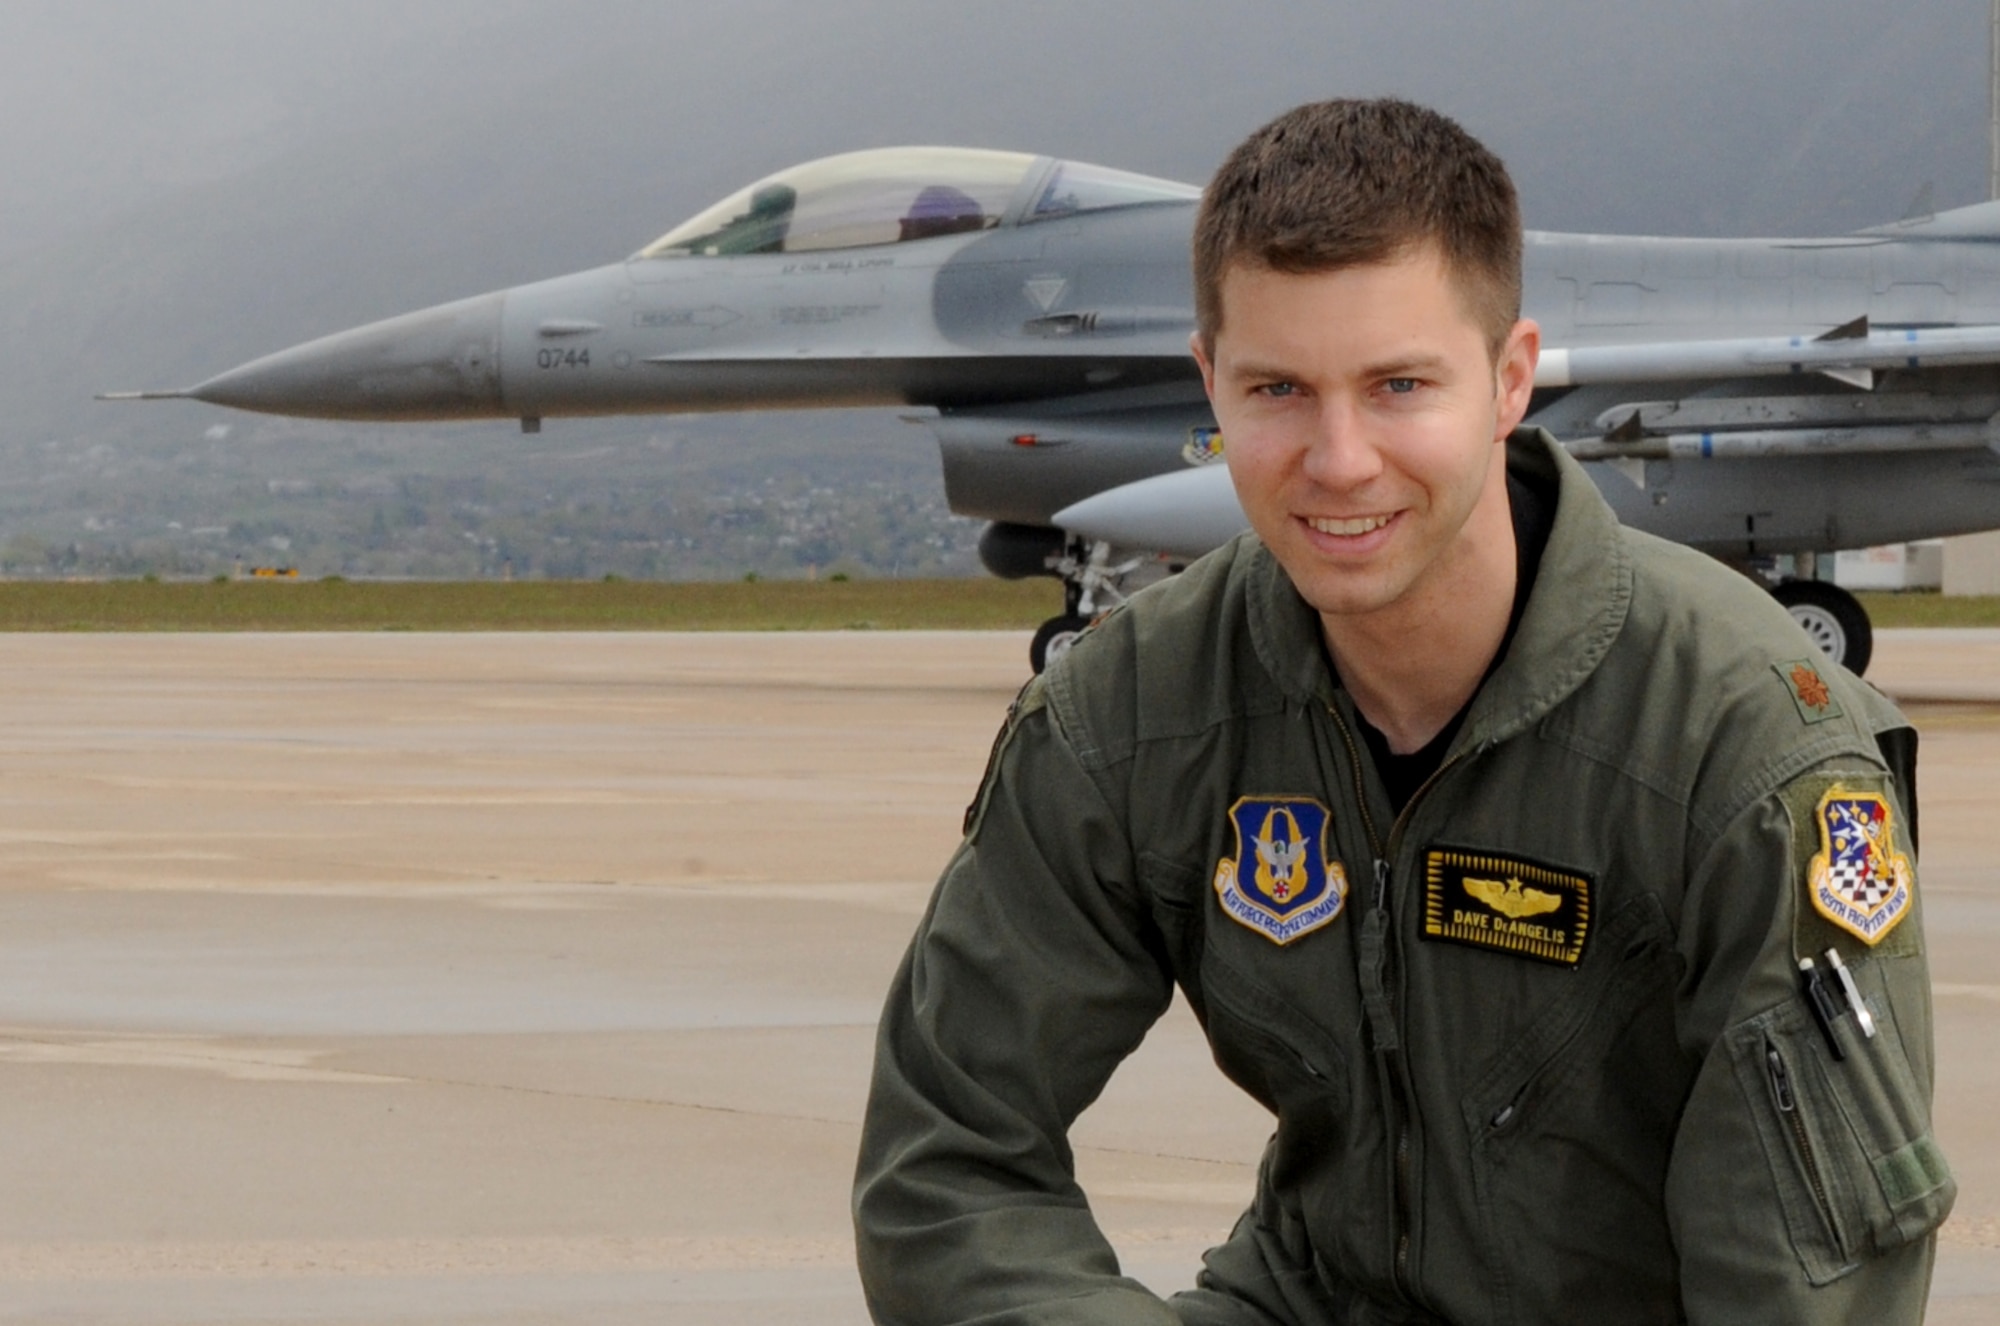 In his Reserve job, 419th Fighter Wing pilot Maj. David DeAngelis tests the F-16 software that he helps design in his civilian capacity at Hill Air Force Base's 309th Software Maintenance Group. (File photo)